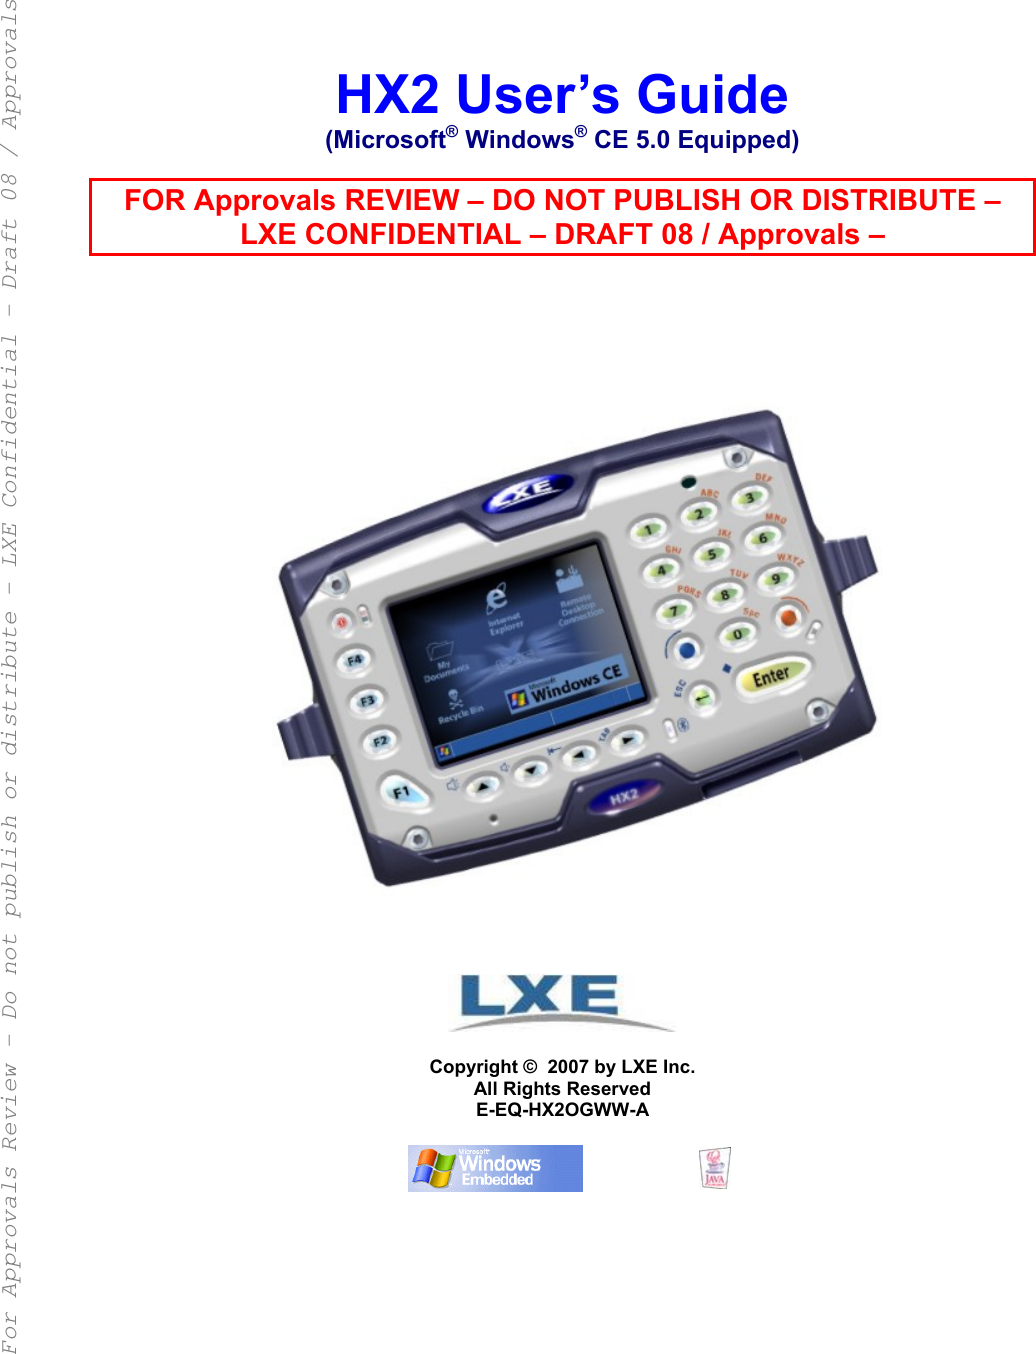        HX2 User’s Guide (Microsoft® Windows® CE 5.0 Equipped)  FOR Approvals REVIEW – DO NOT PUBLISH OR DISTRIBUTE – LXE CONFIDENTIAL – DRAFT 08 / Approvals –                                 Copyright ©  2007 by LXE Inc. All Rights Reserved E-EQ-HX2OGWW-A       For Approvals Review - Do not publish or distribute - LXE Confidential - Draft 08 / Approvals